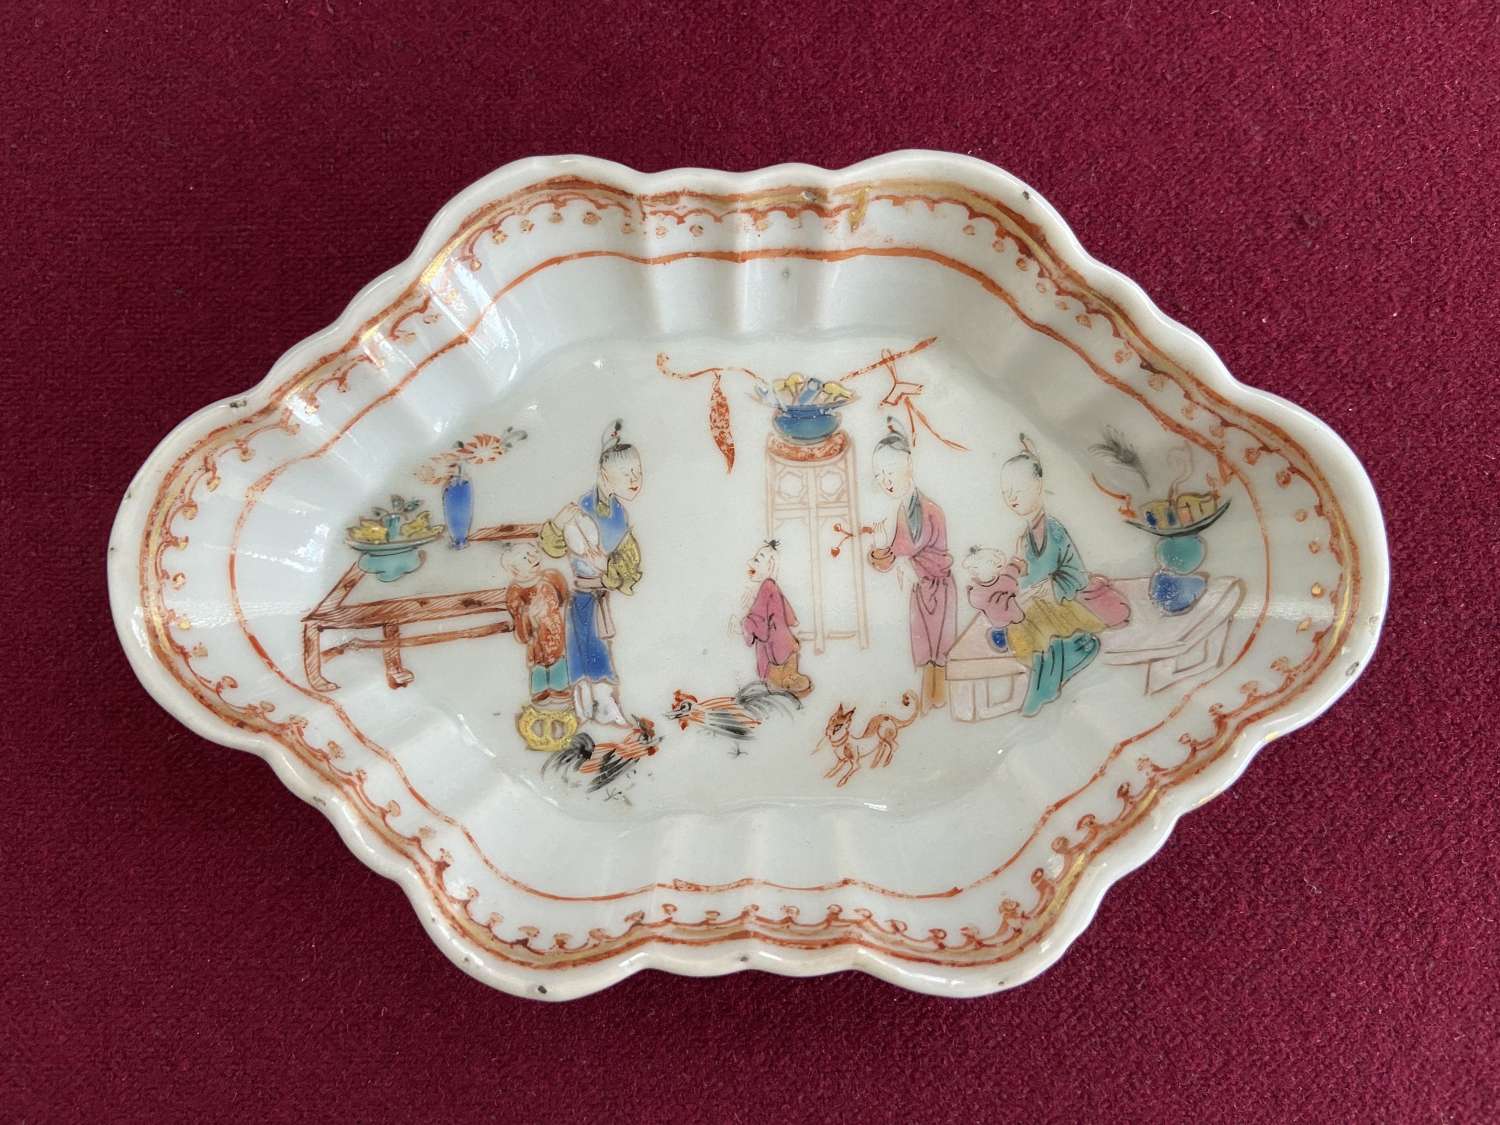 A Chinese Export Porcelain Spoon Tray/Rest c.1750